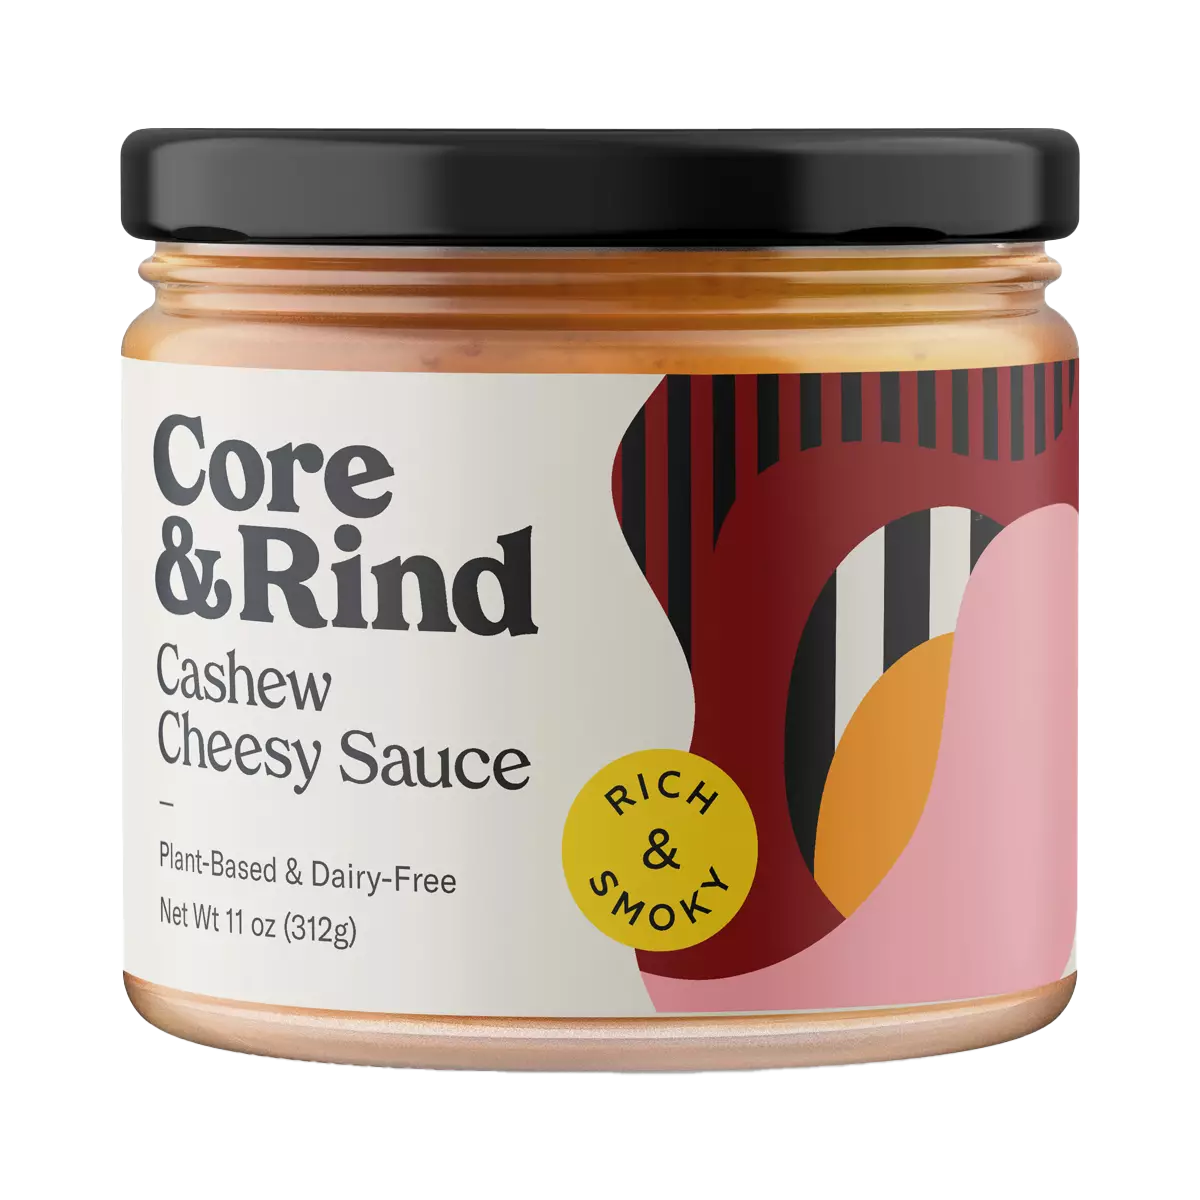 Core Rind Cashew Cheesy Sauce-Rich and Smoky